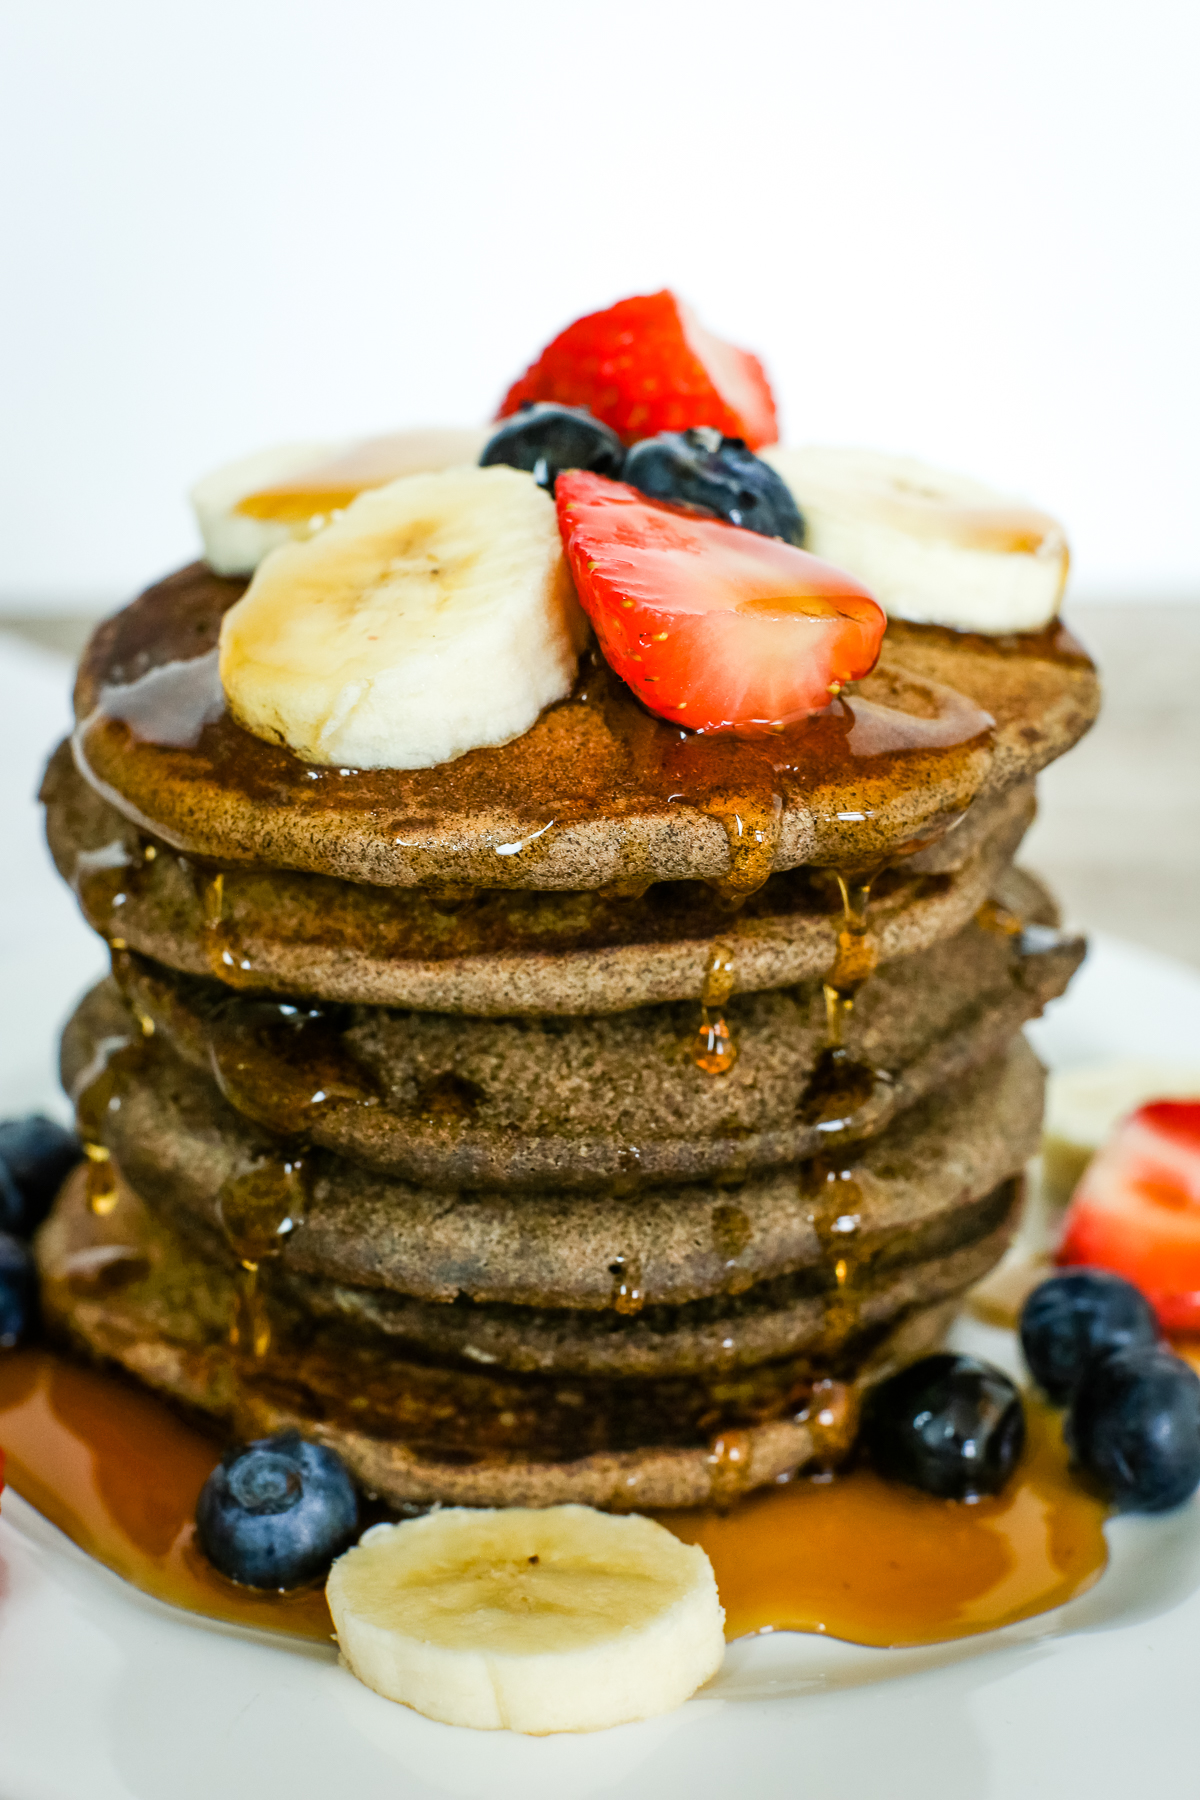 close up view of buckwheat pancakes with strawberries, blueberries, and bananas and syrup dripping down the stack